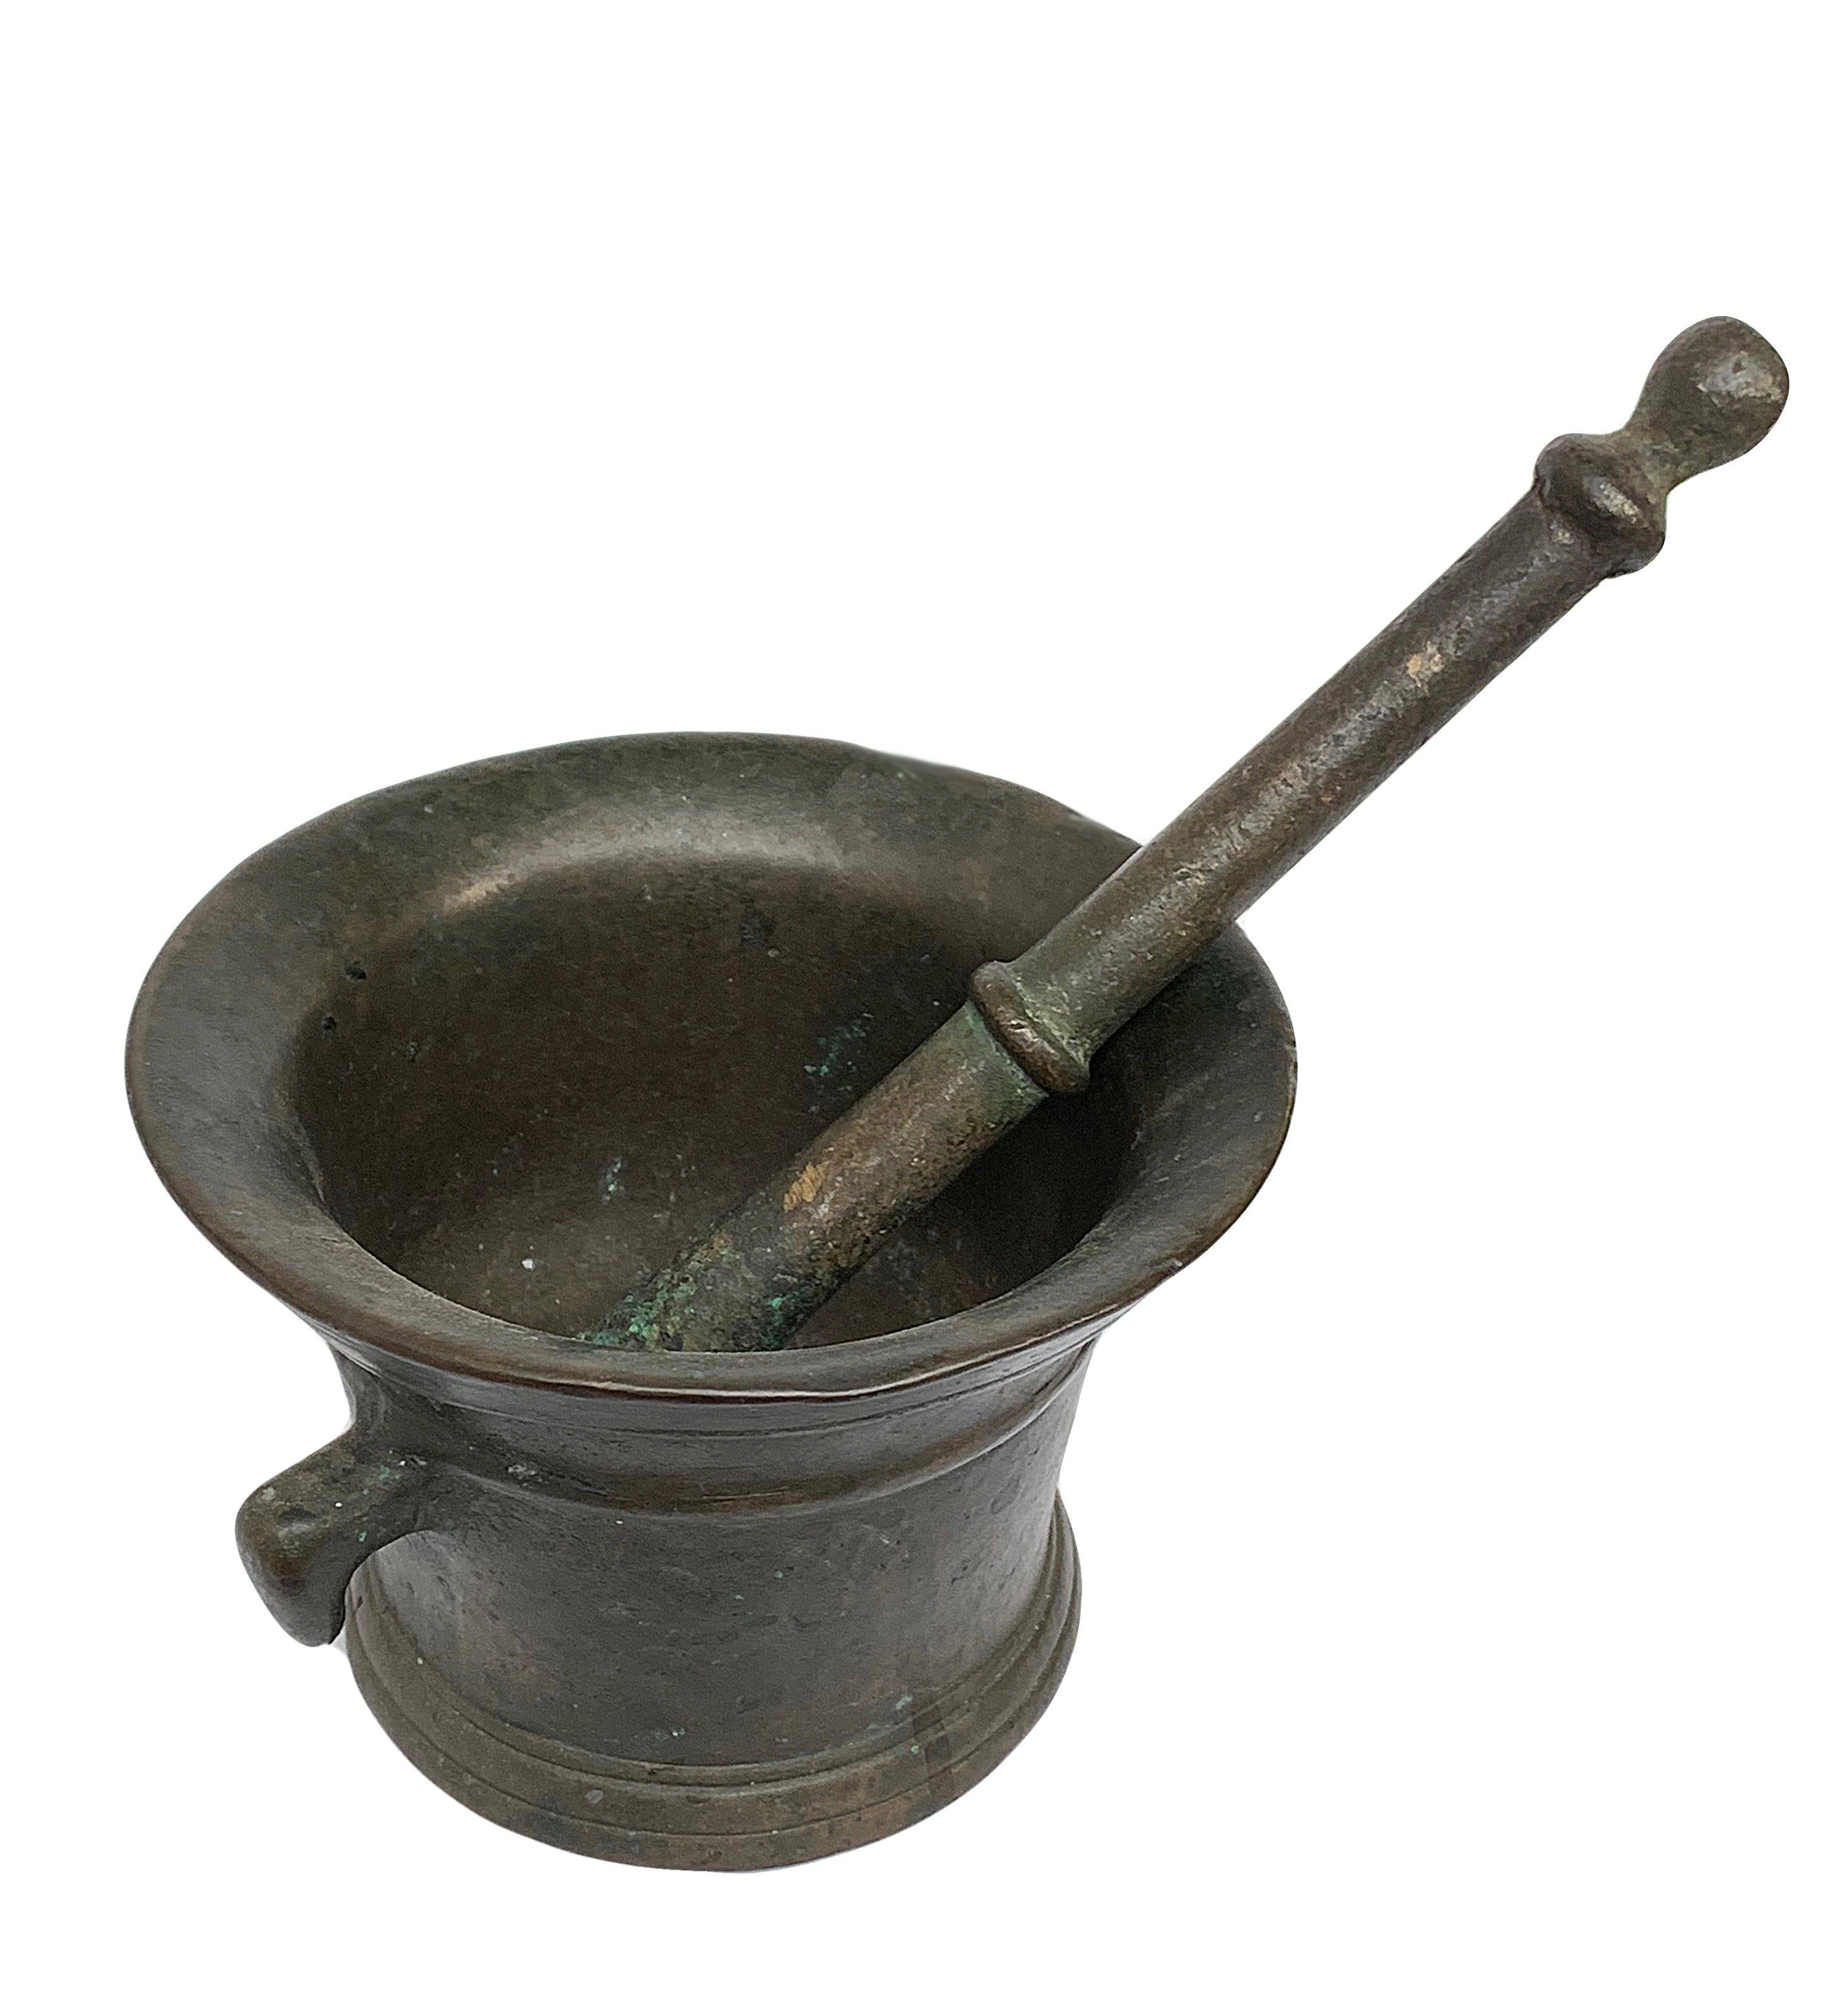 19th Century Italian Bronze Mortar and Pestle, Original Patina, Italy, Pharmacy or Herbalist For Sale